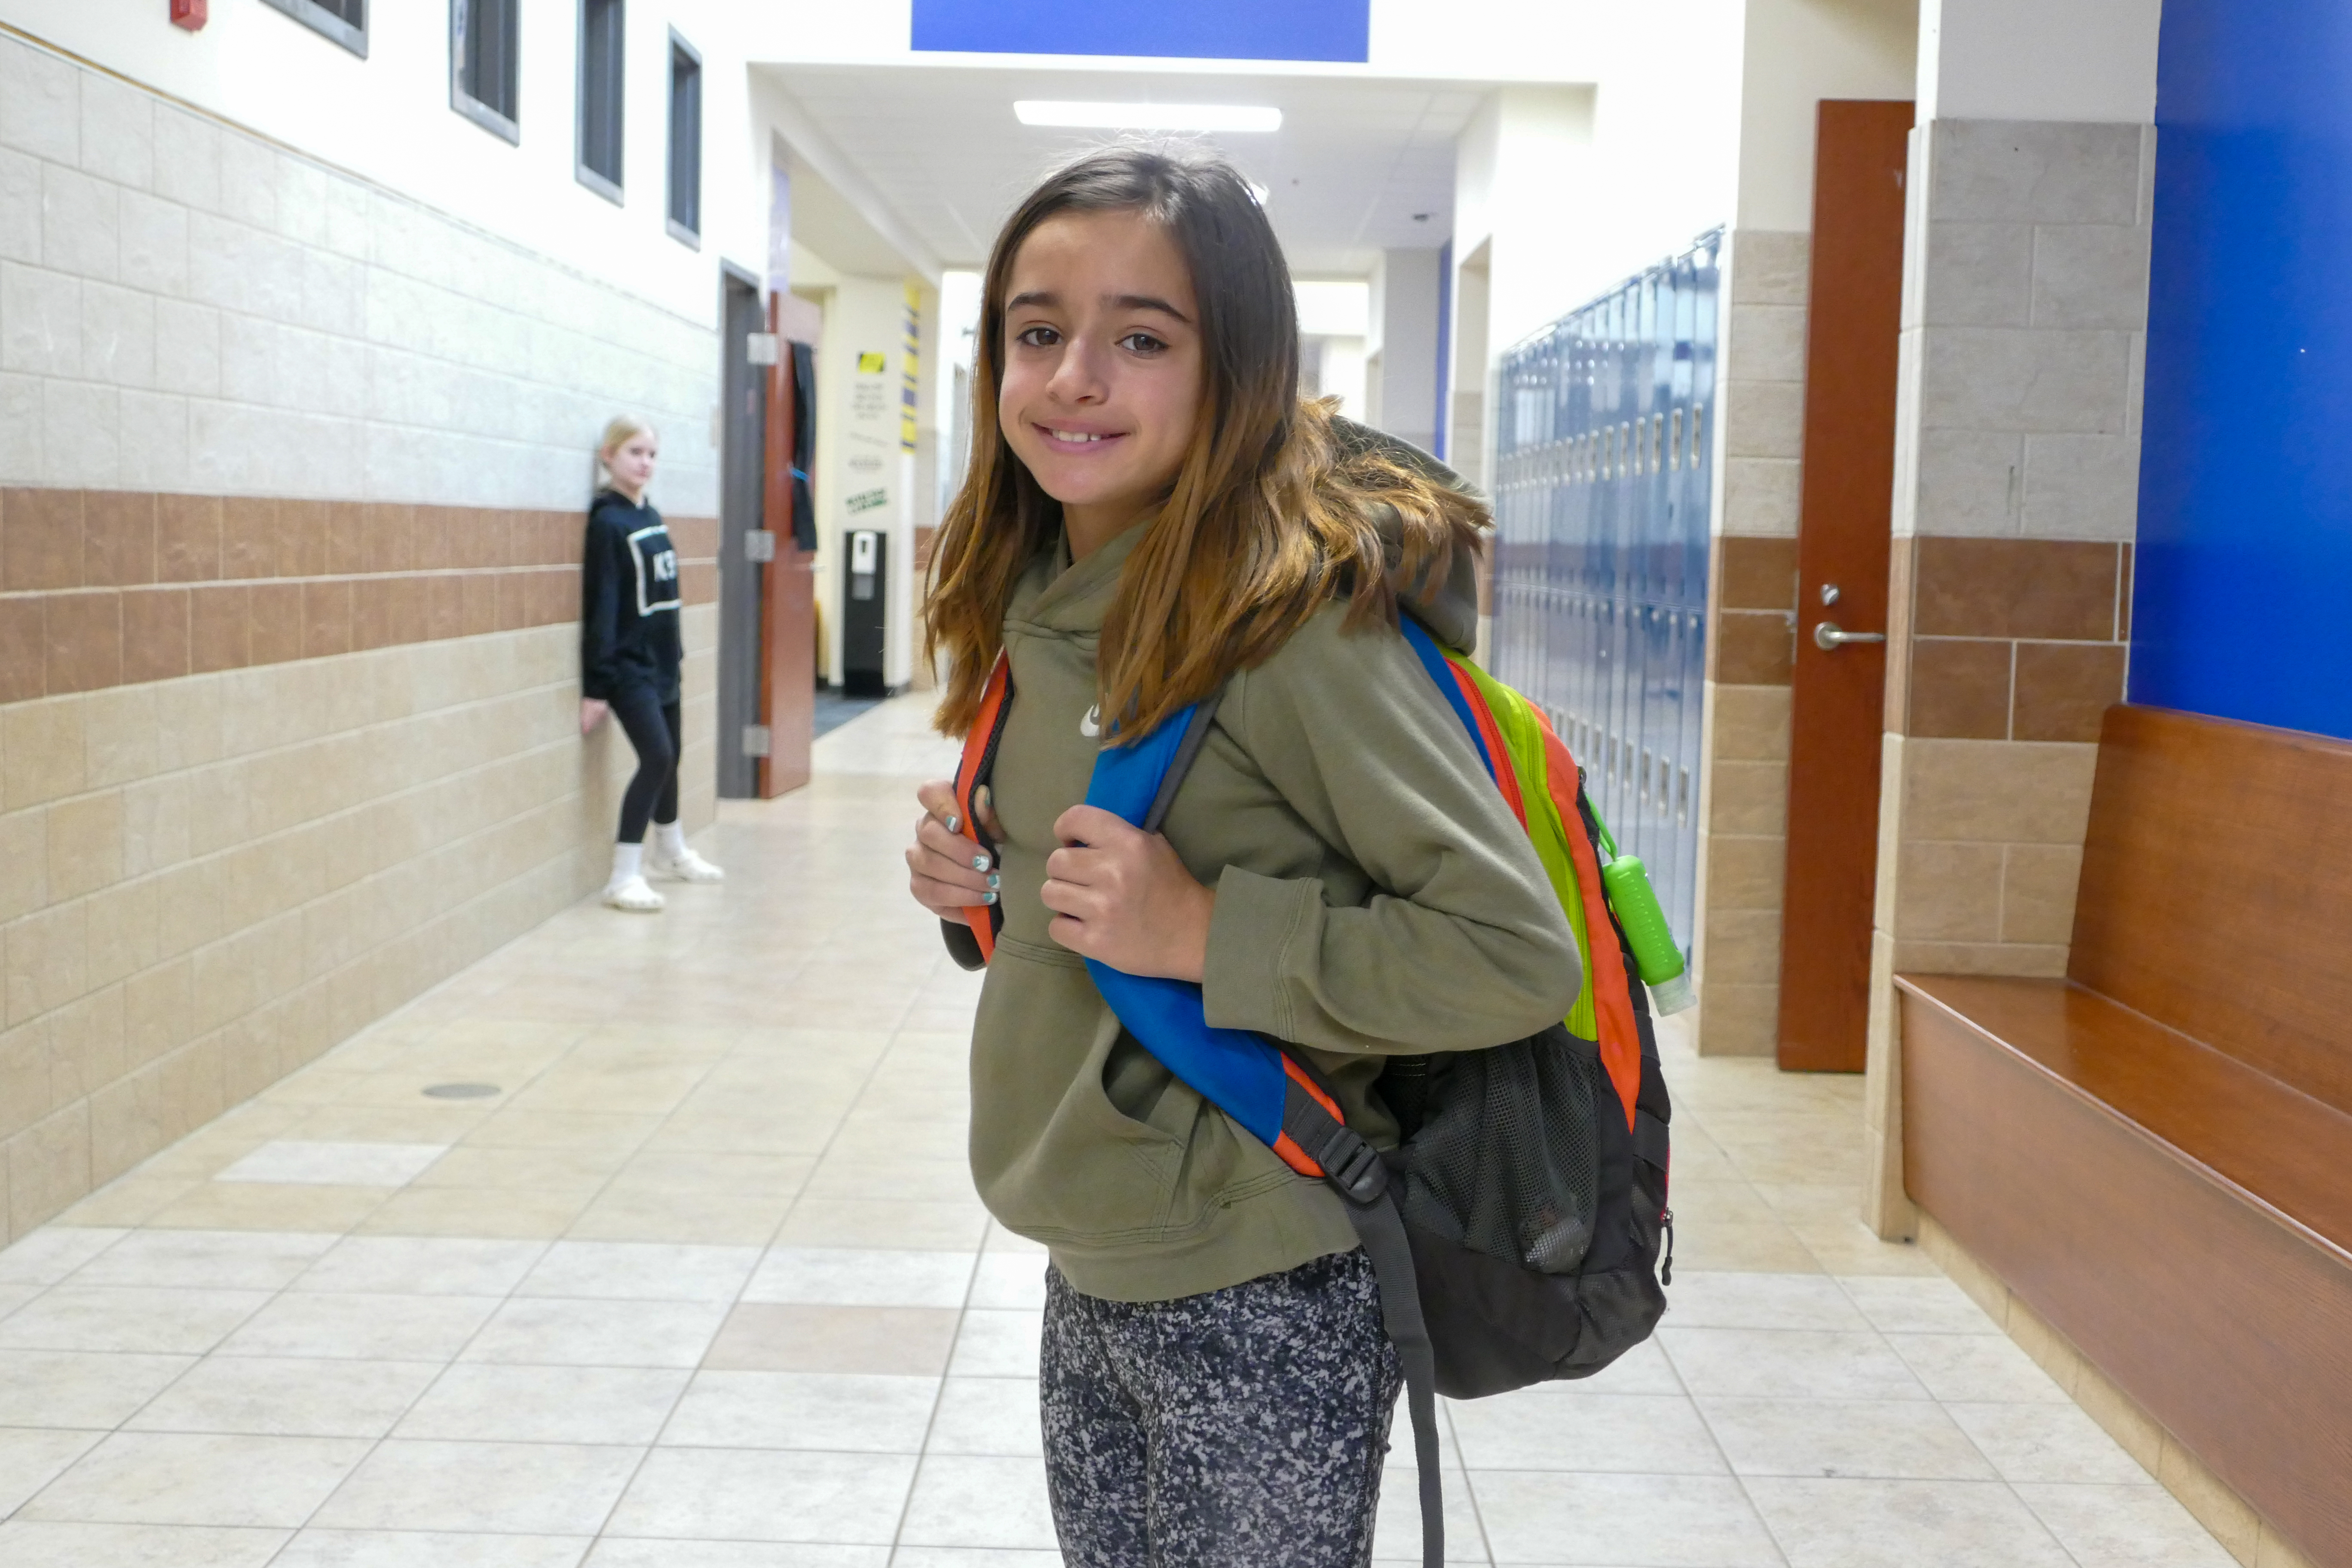 A student in the hallway poses with her backpack